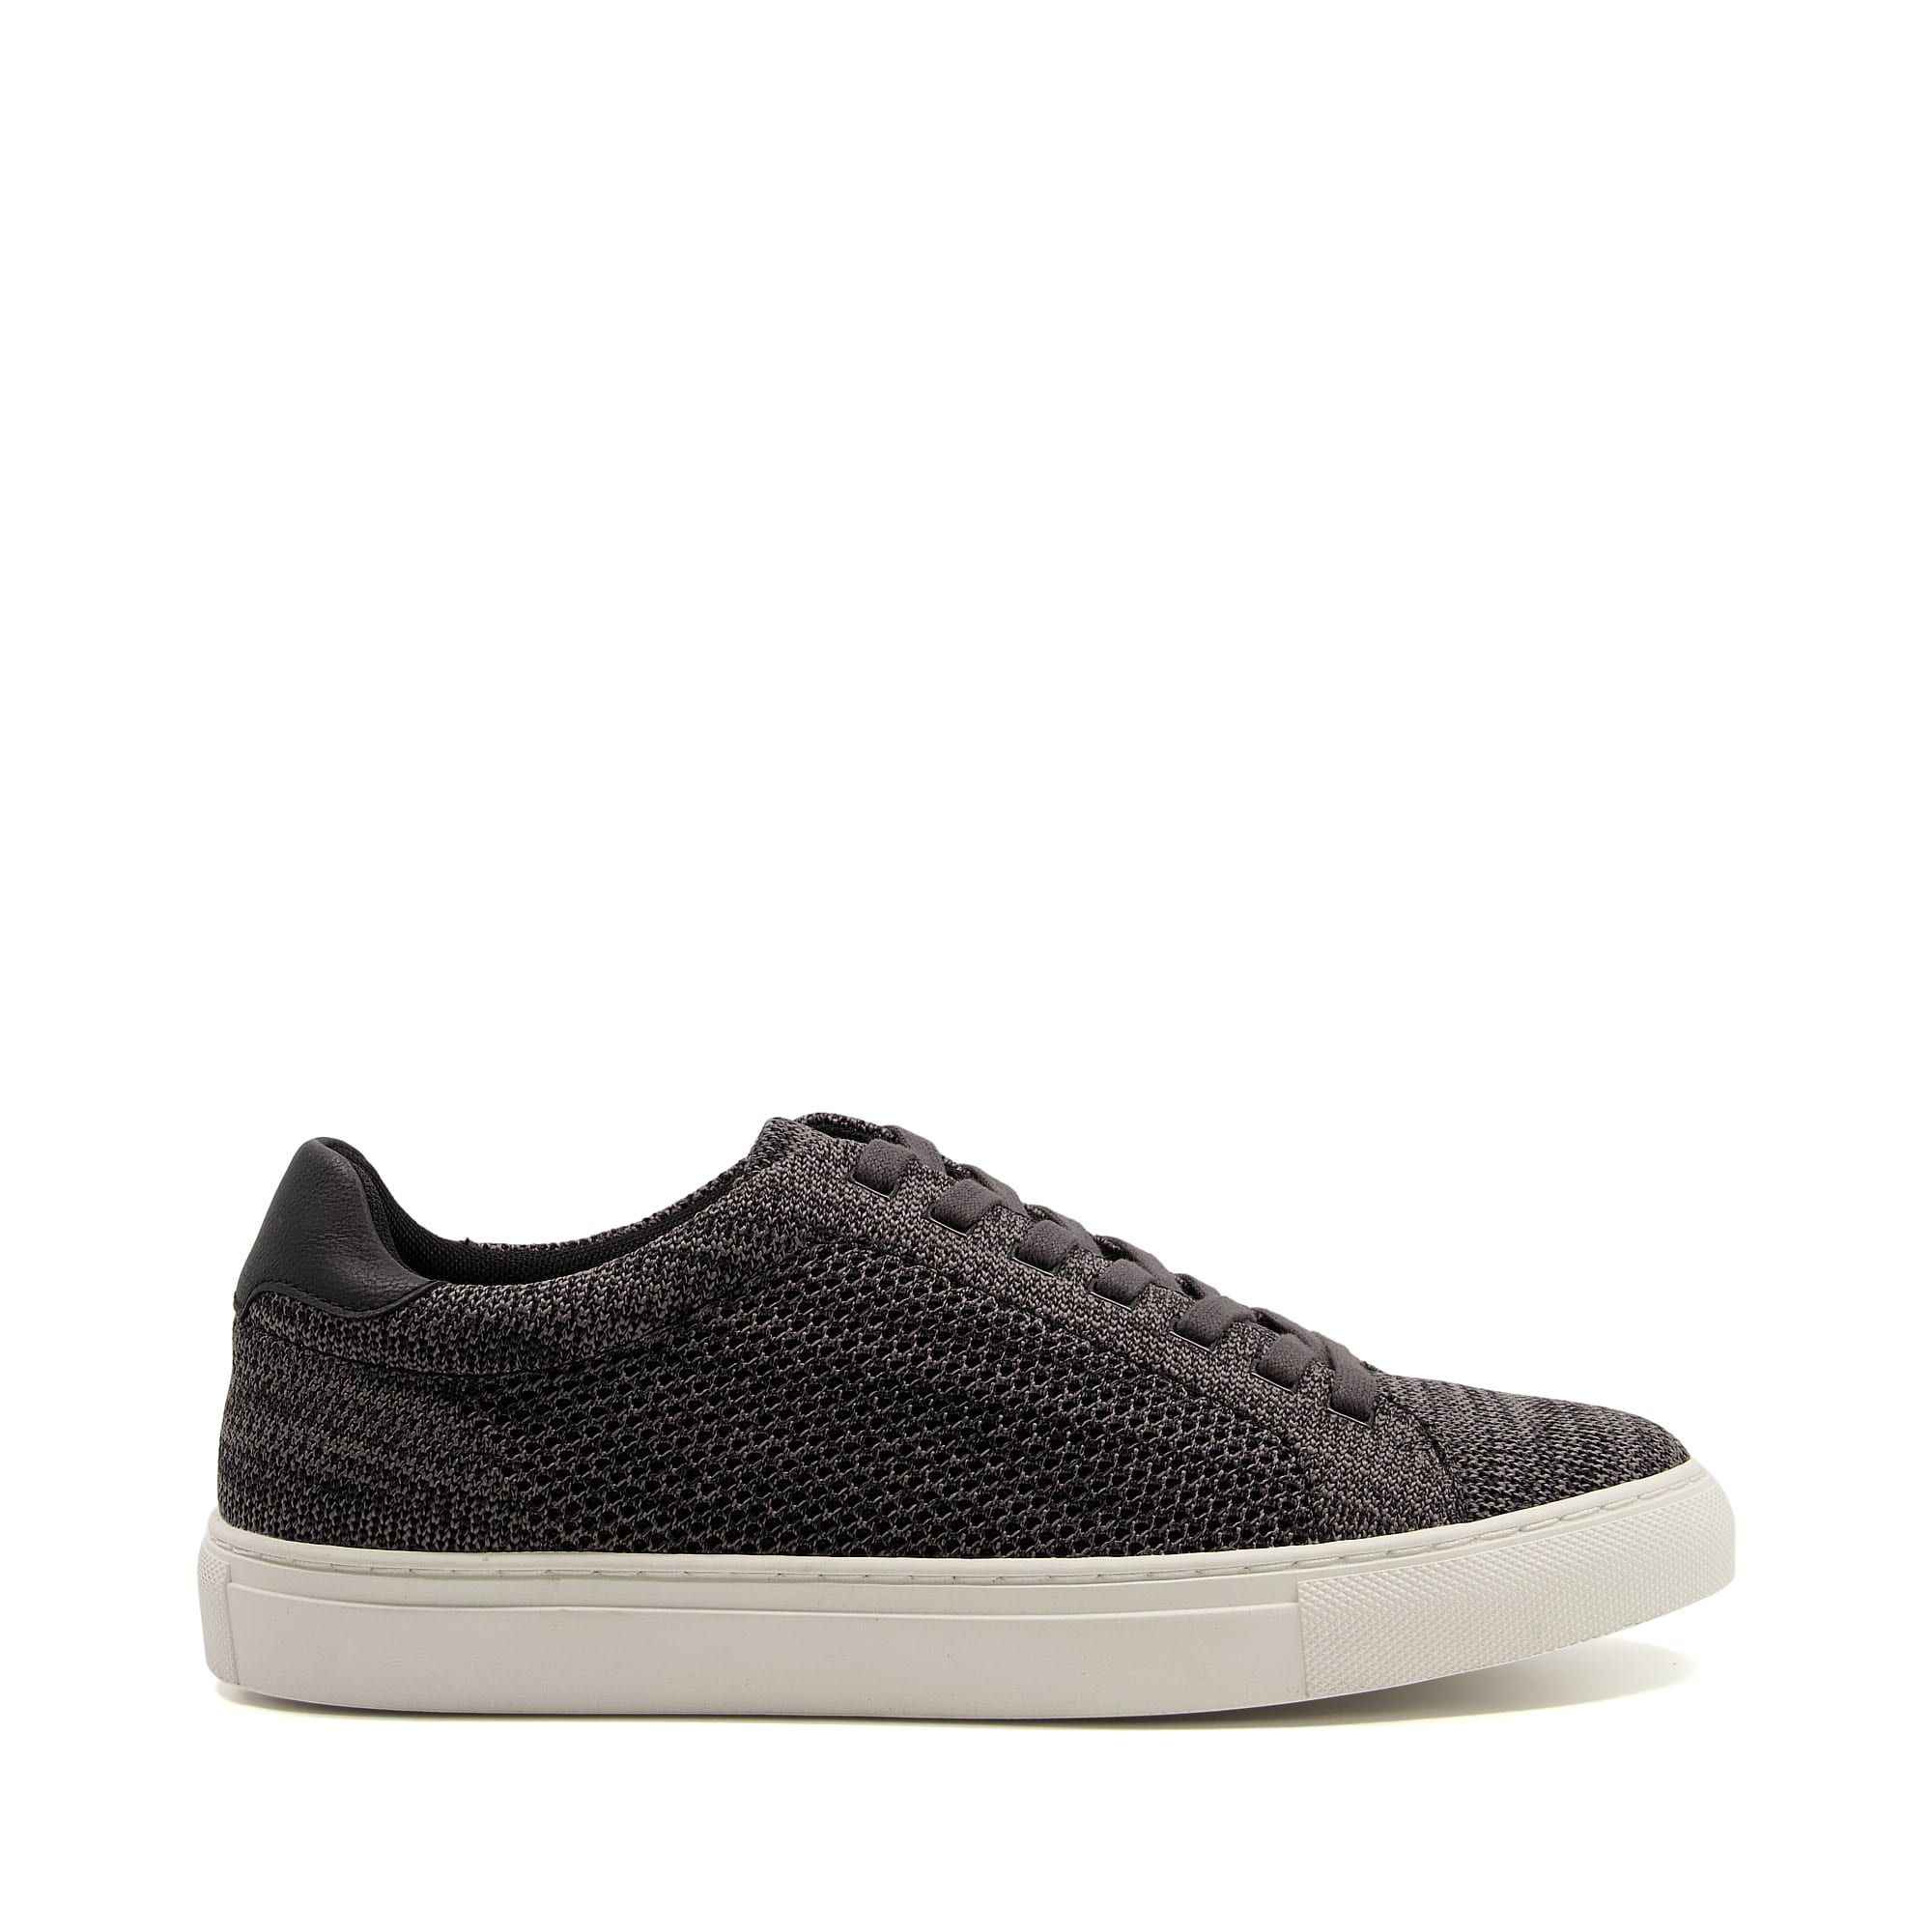 With a trend-led knitted upper and a retro-sneaker silhouette, these trainers are perfect for the summer months. This modern style is wonderfully comfortable and ideal for everyday wear.